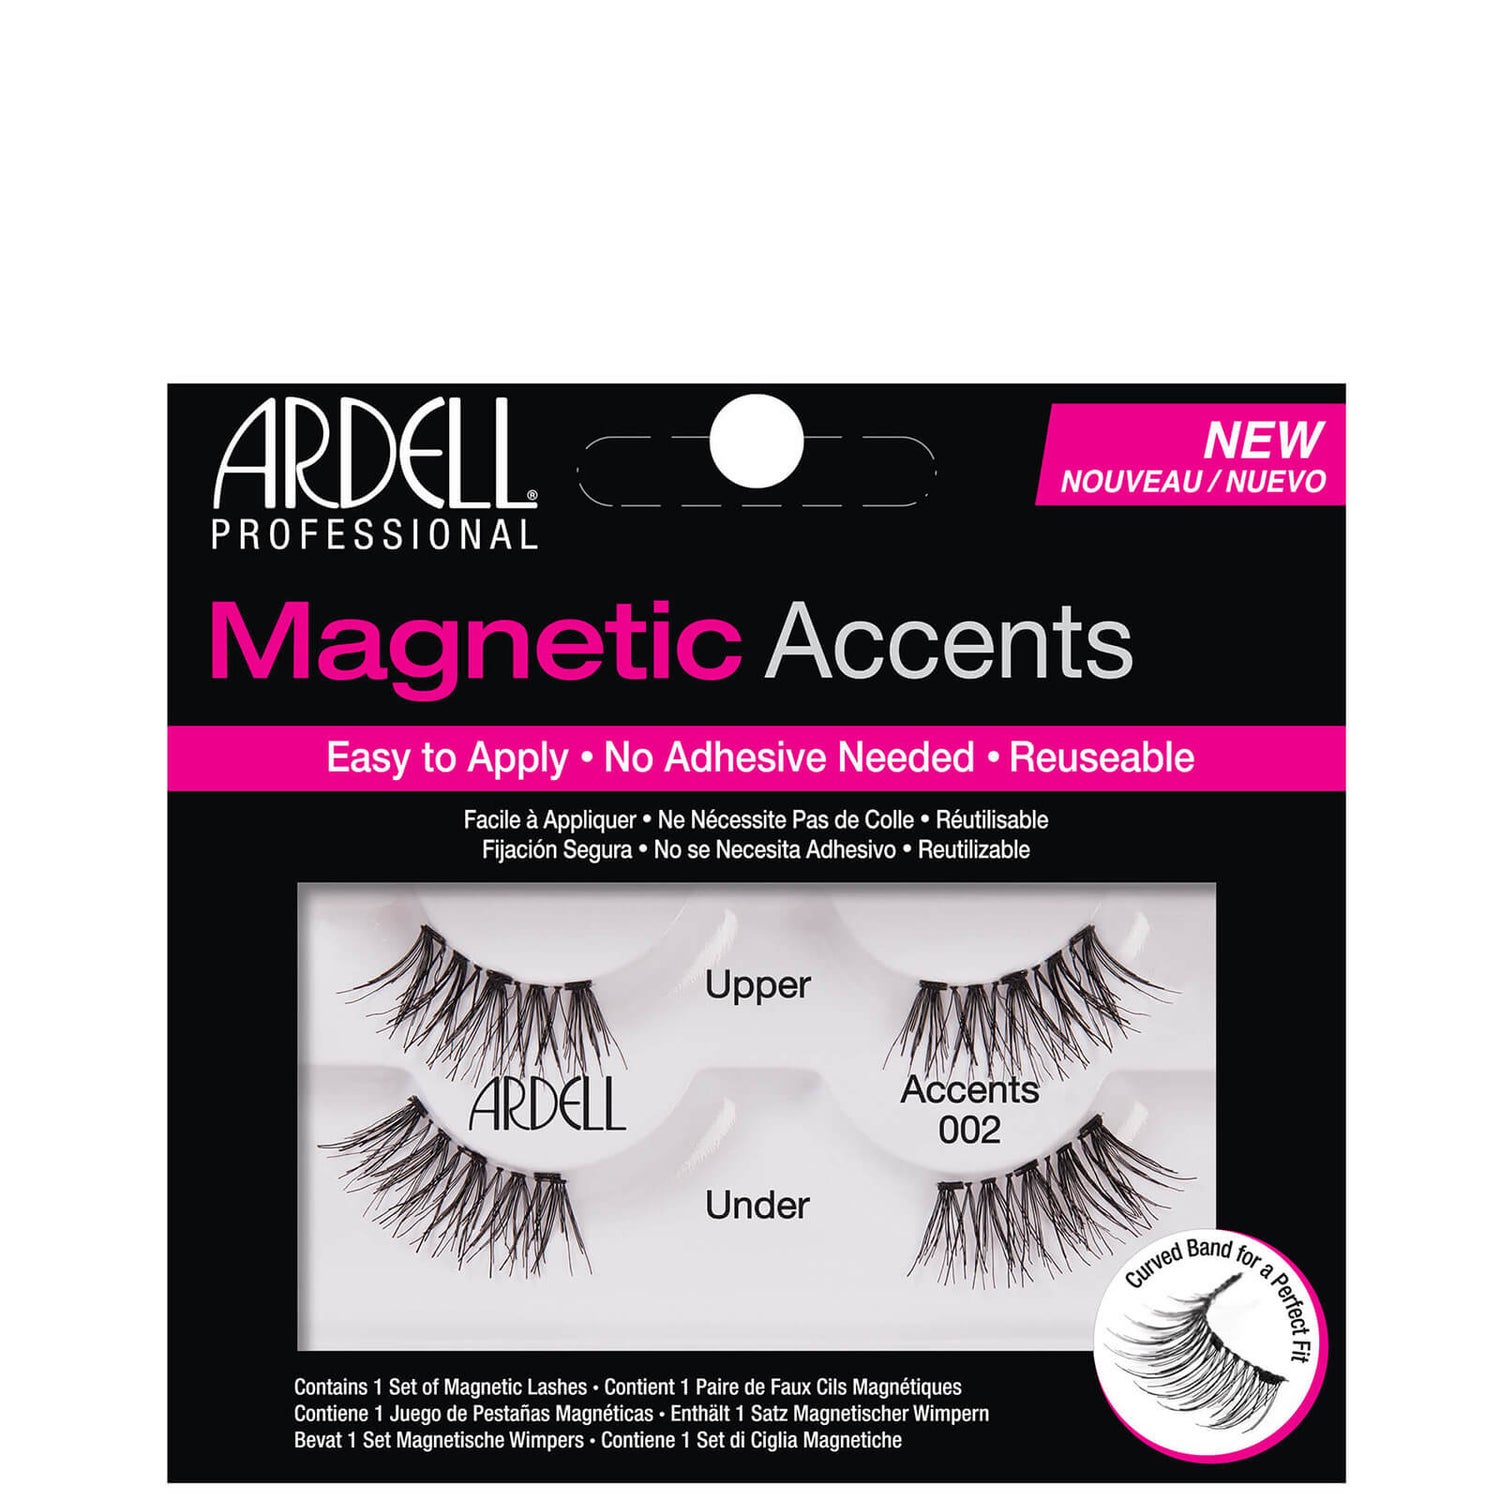 Faux-cils Magnetic Lash Natural Accents 002 Ardell